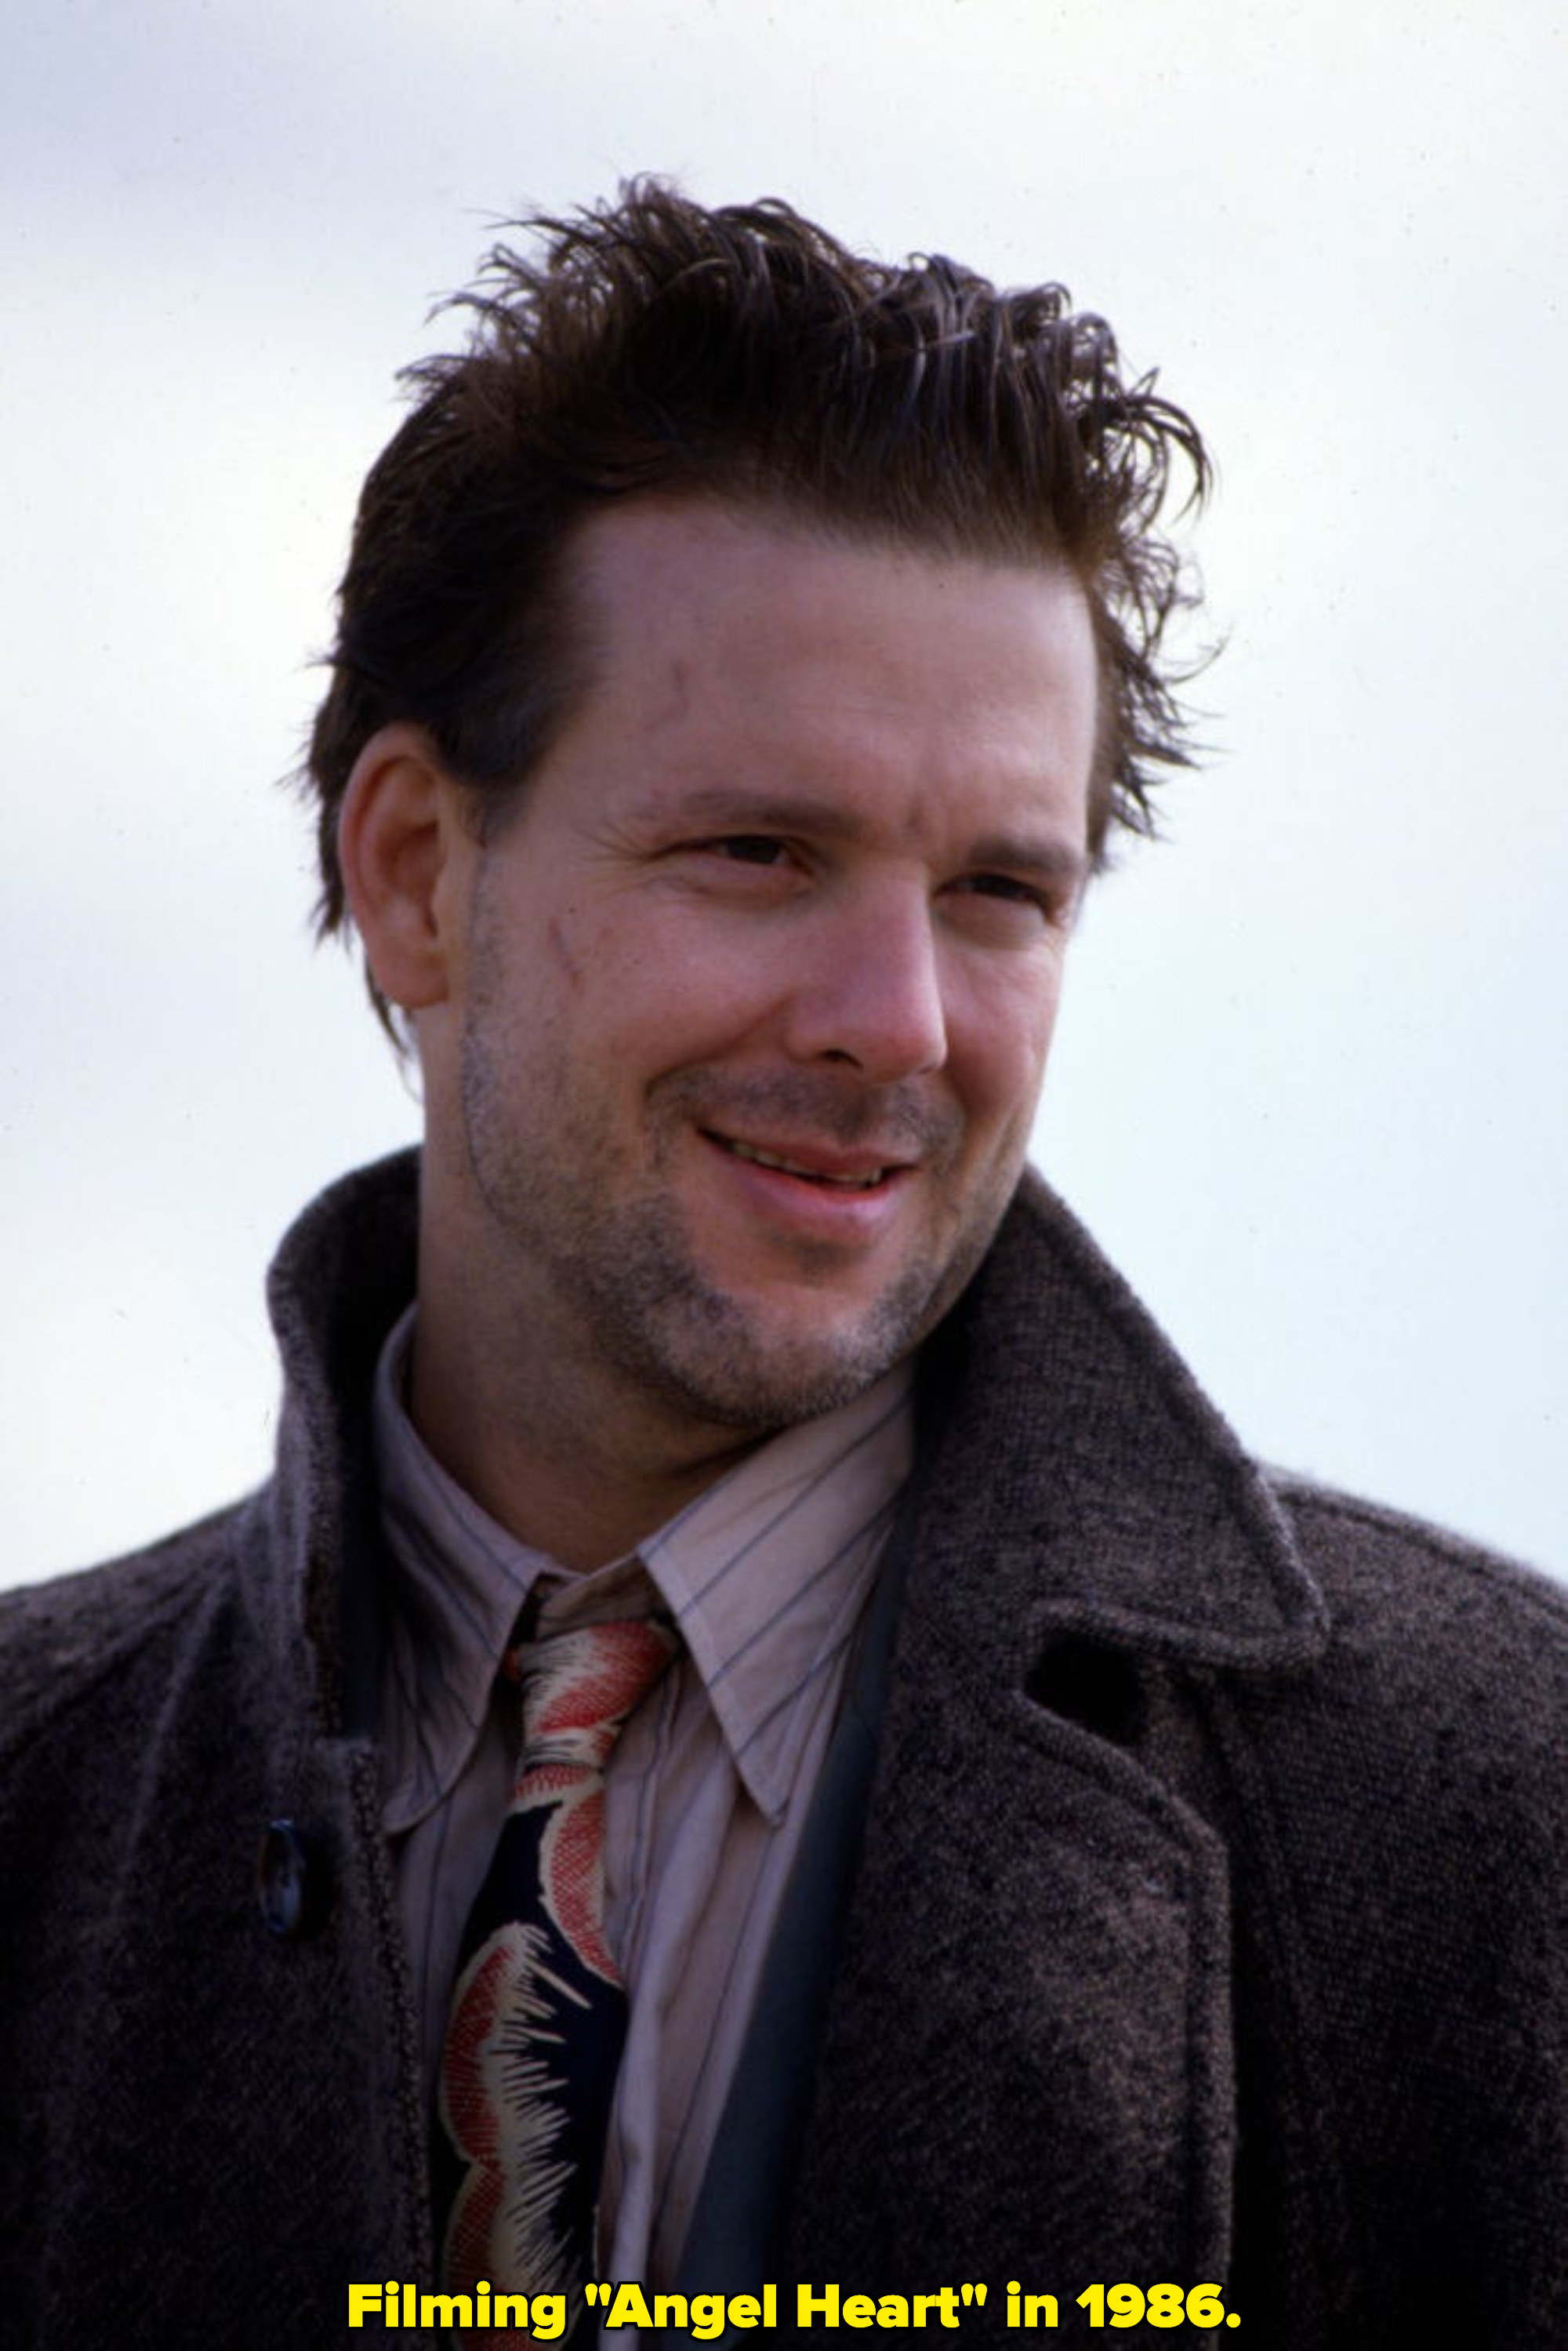 A young Mickey Rourke smiling in 1986